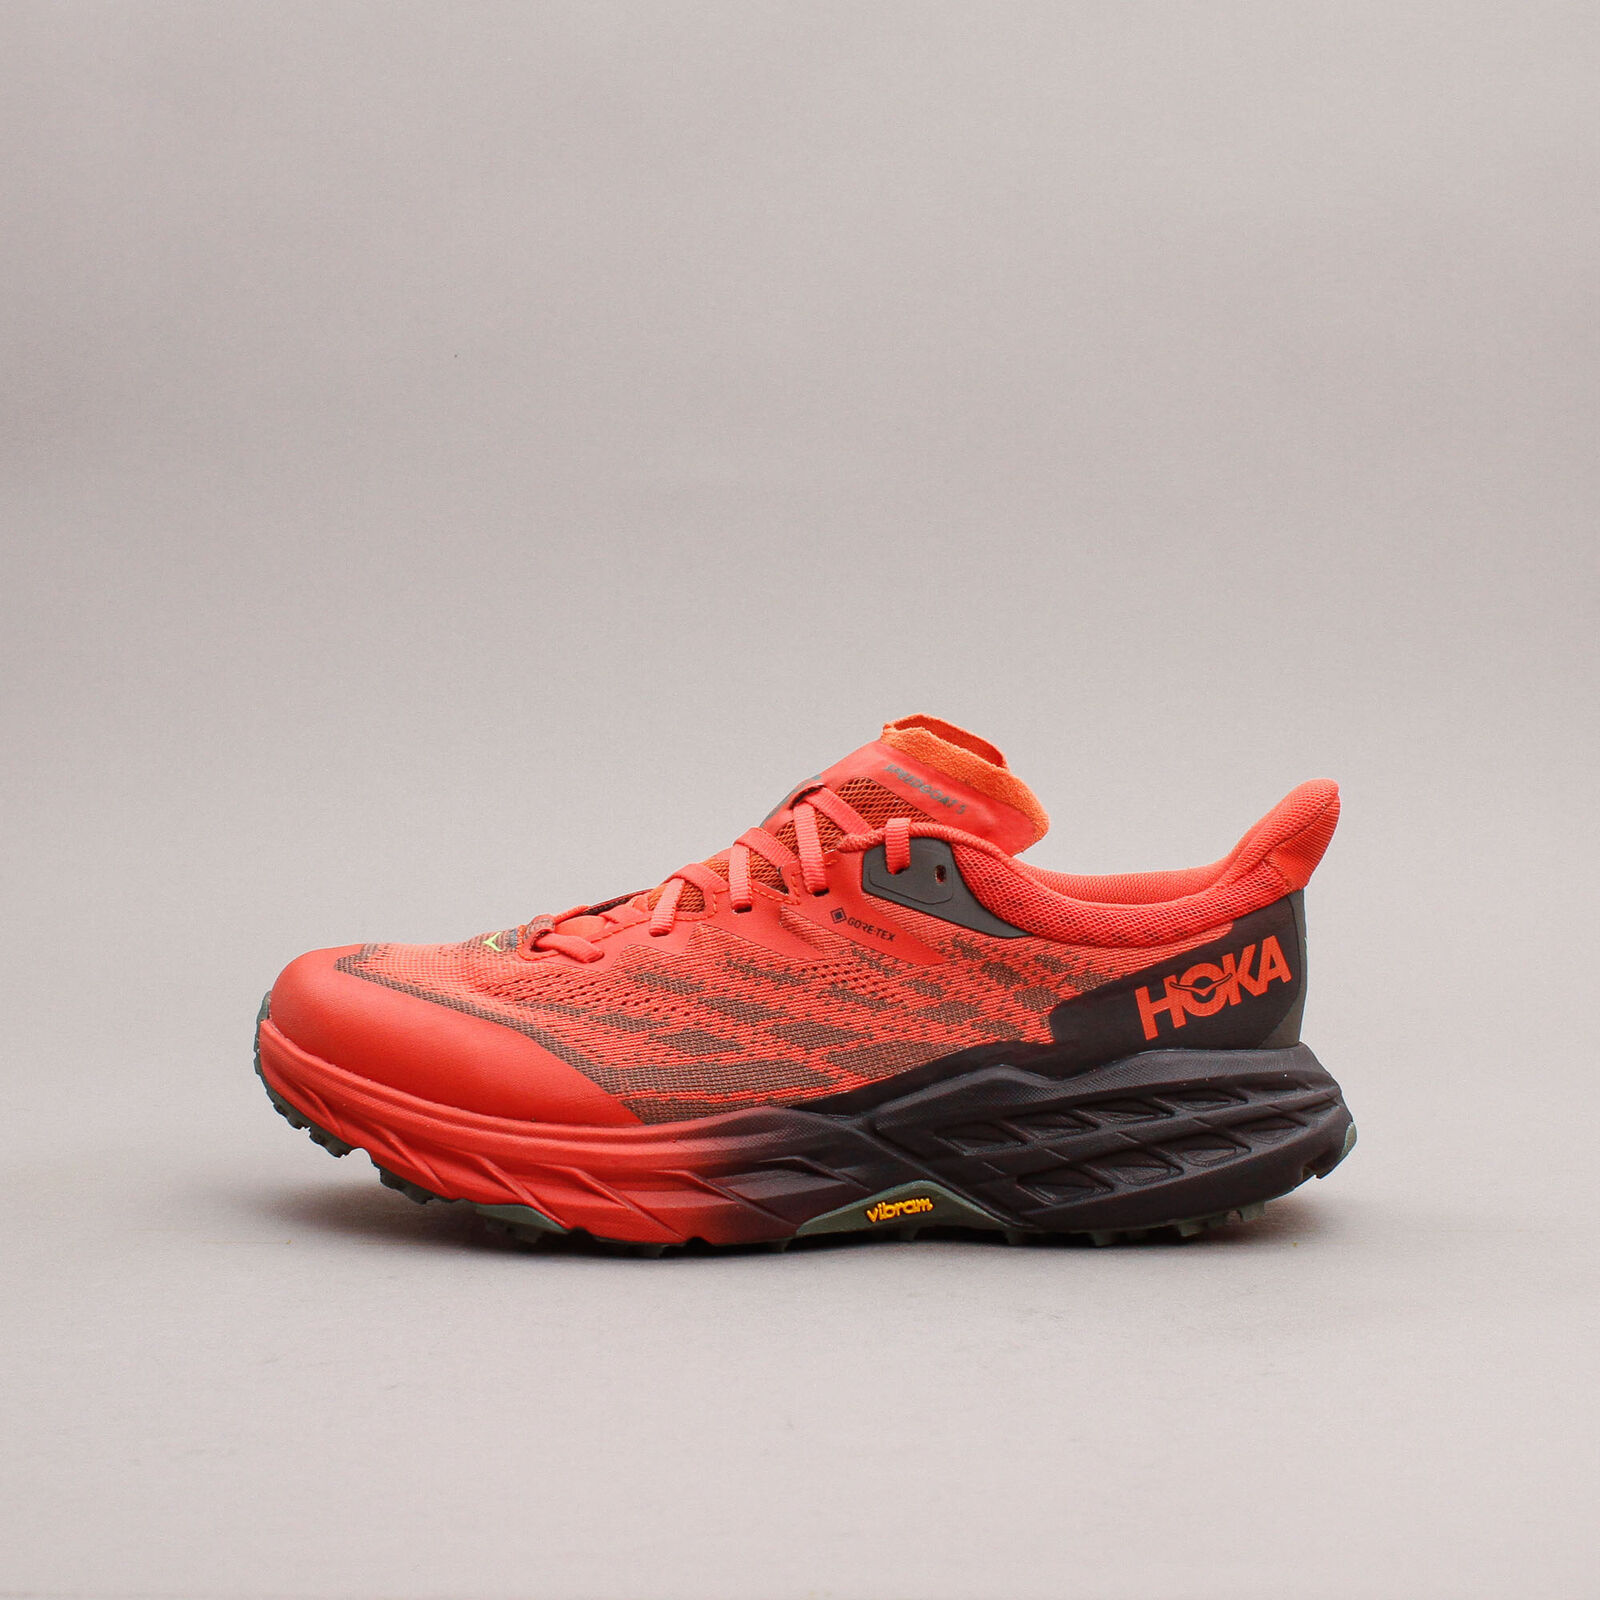 Hoka One One Speedgoat 5 GTX Gore-Tex Trail Running Red Men Shoes 1127912-FTHY